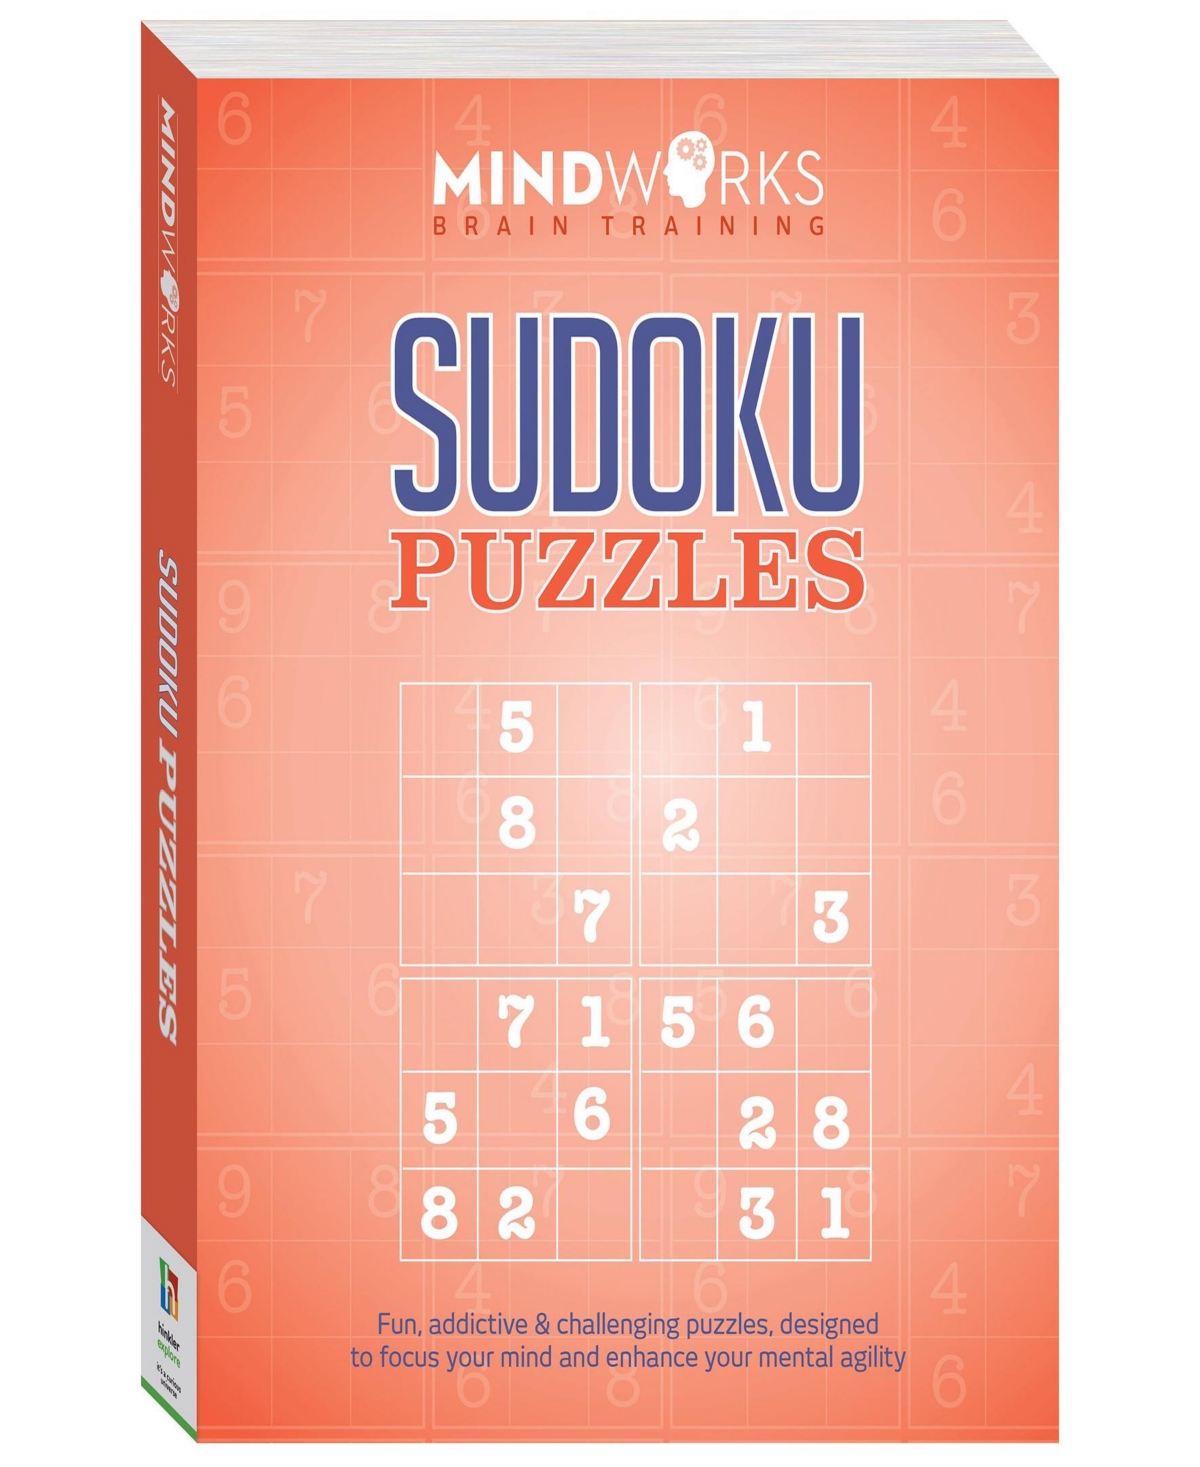 Mindworks - Sudoku Puzzles Puzzle Book In Red